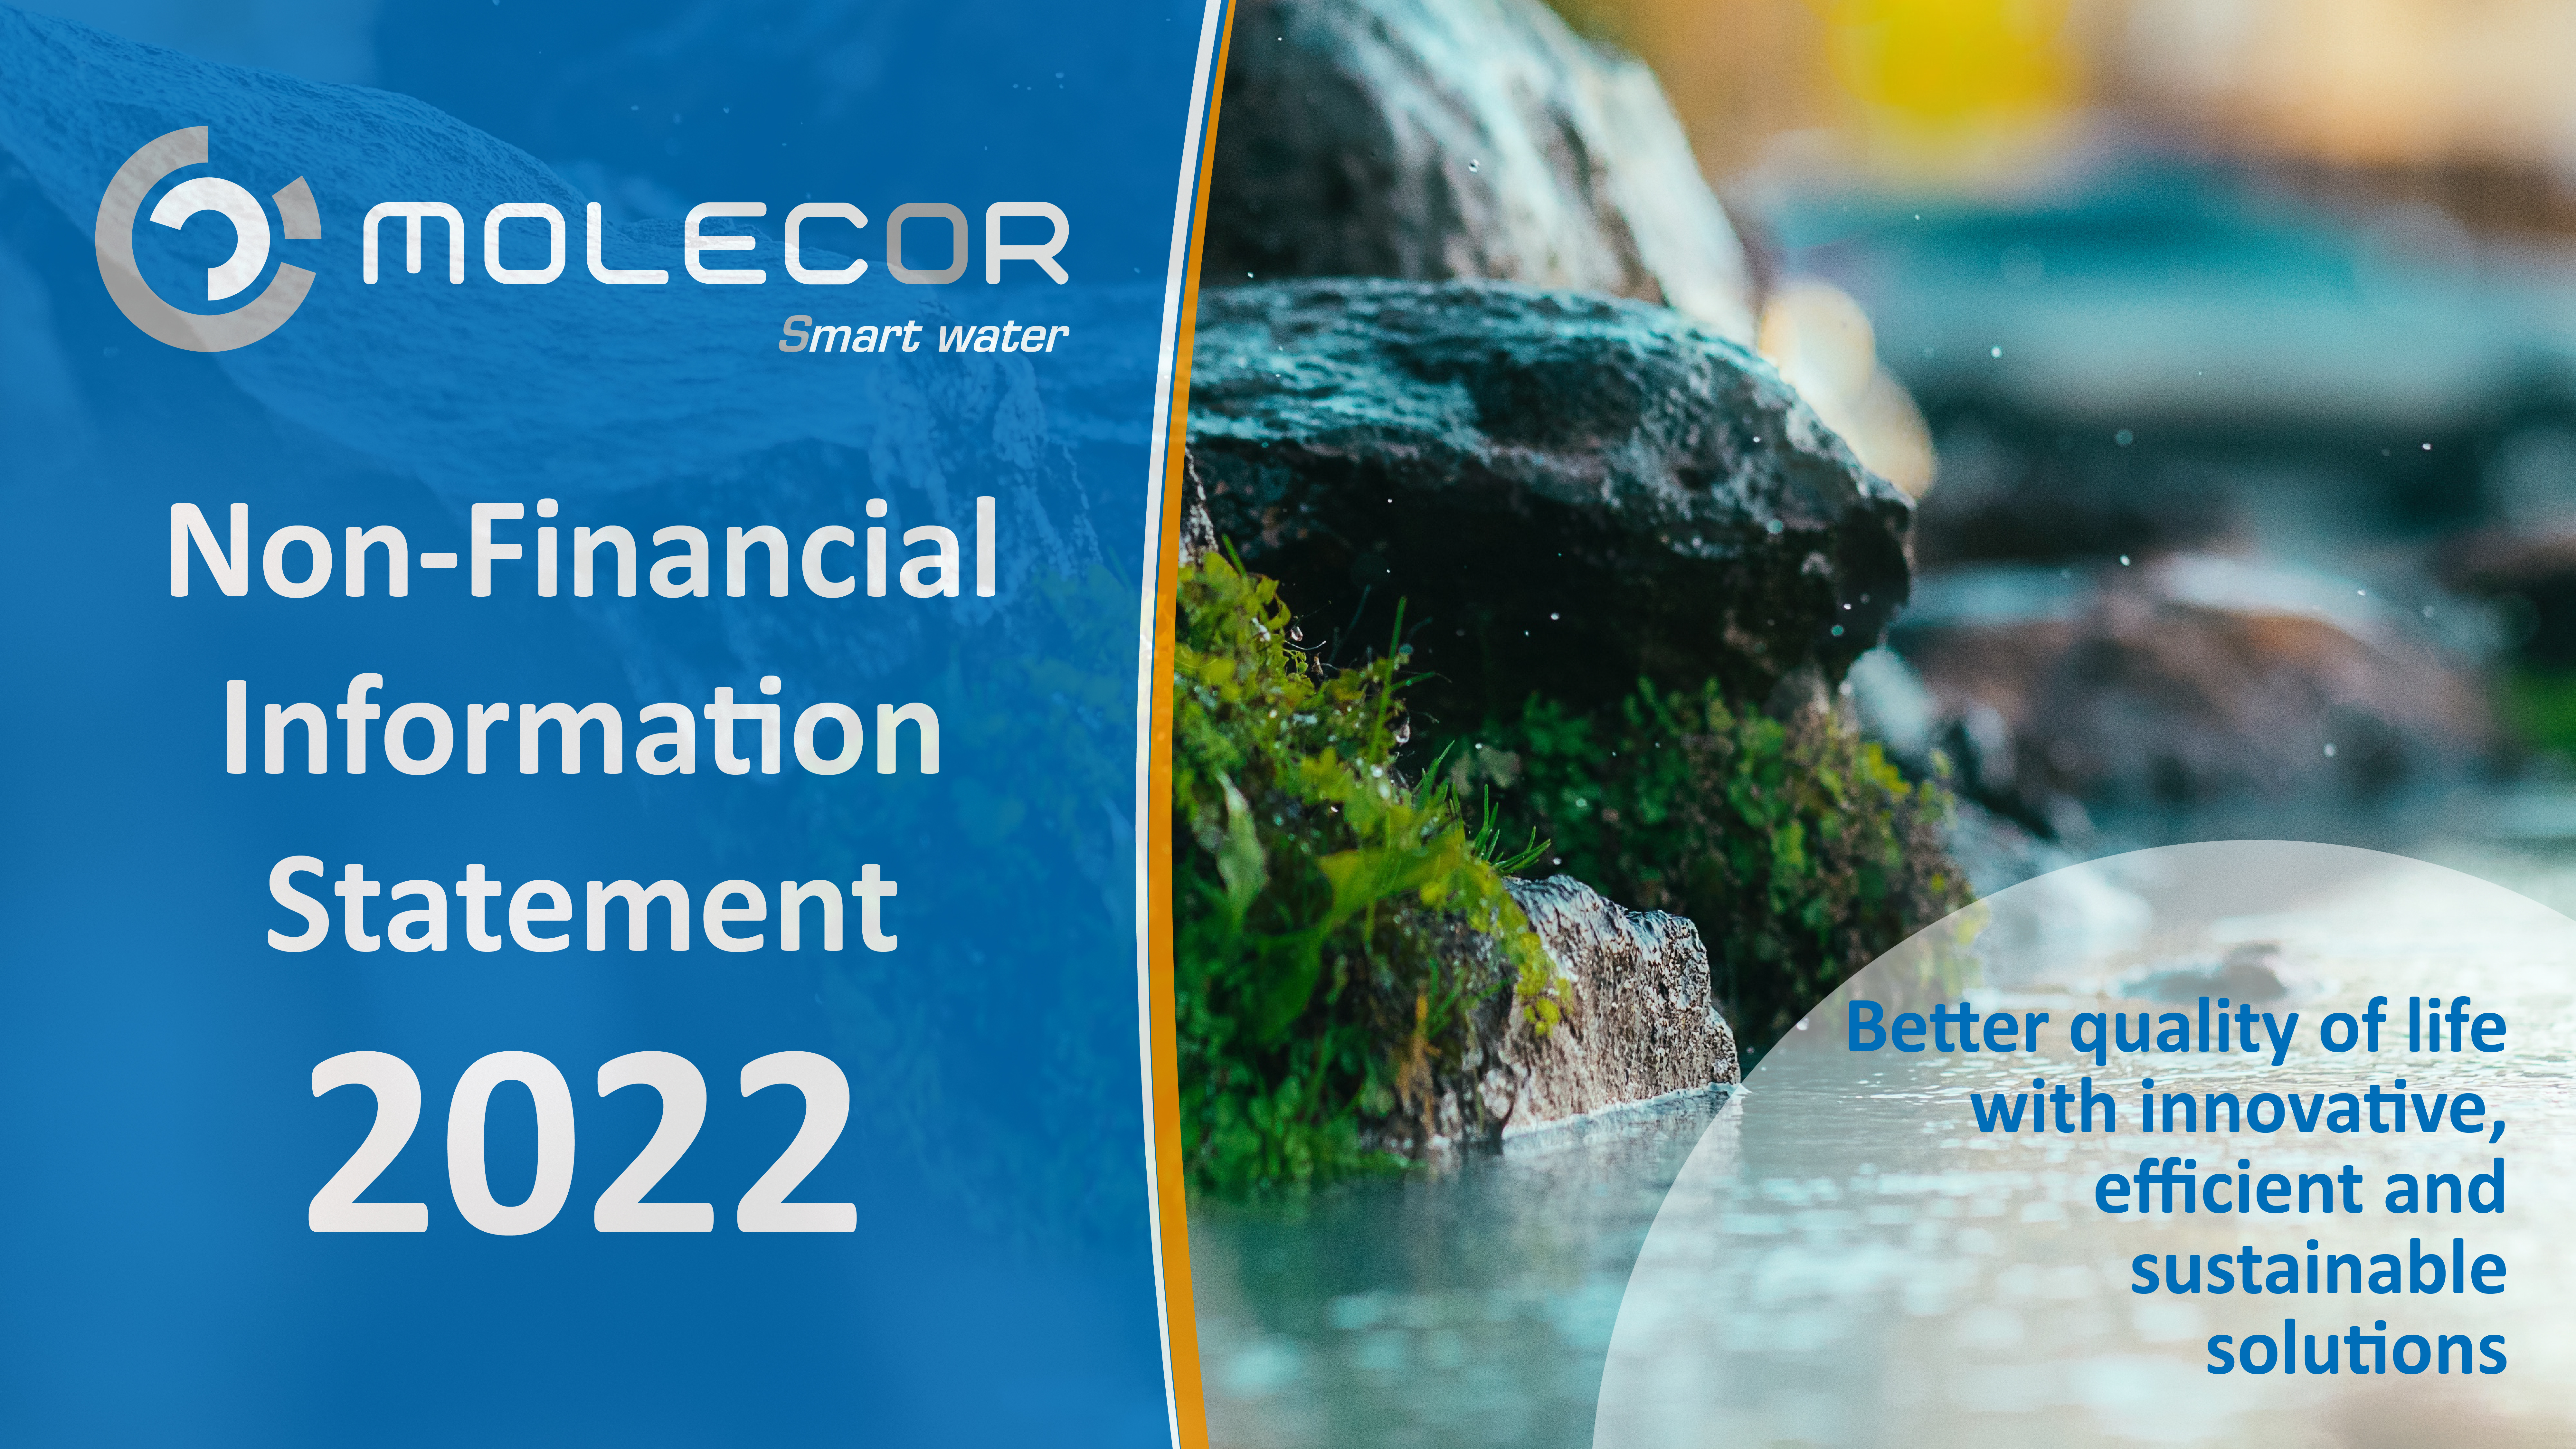 Molecor presents its Non-Financial Information Statement for 2022